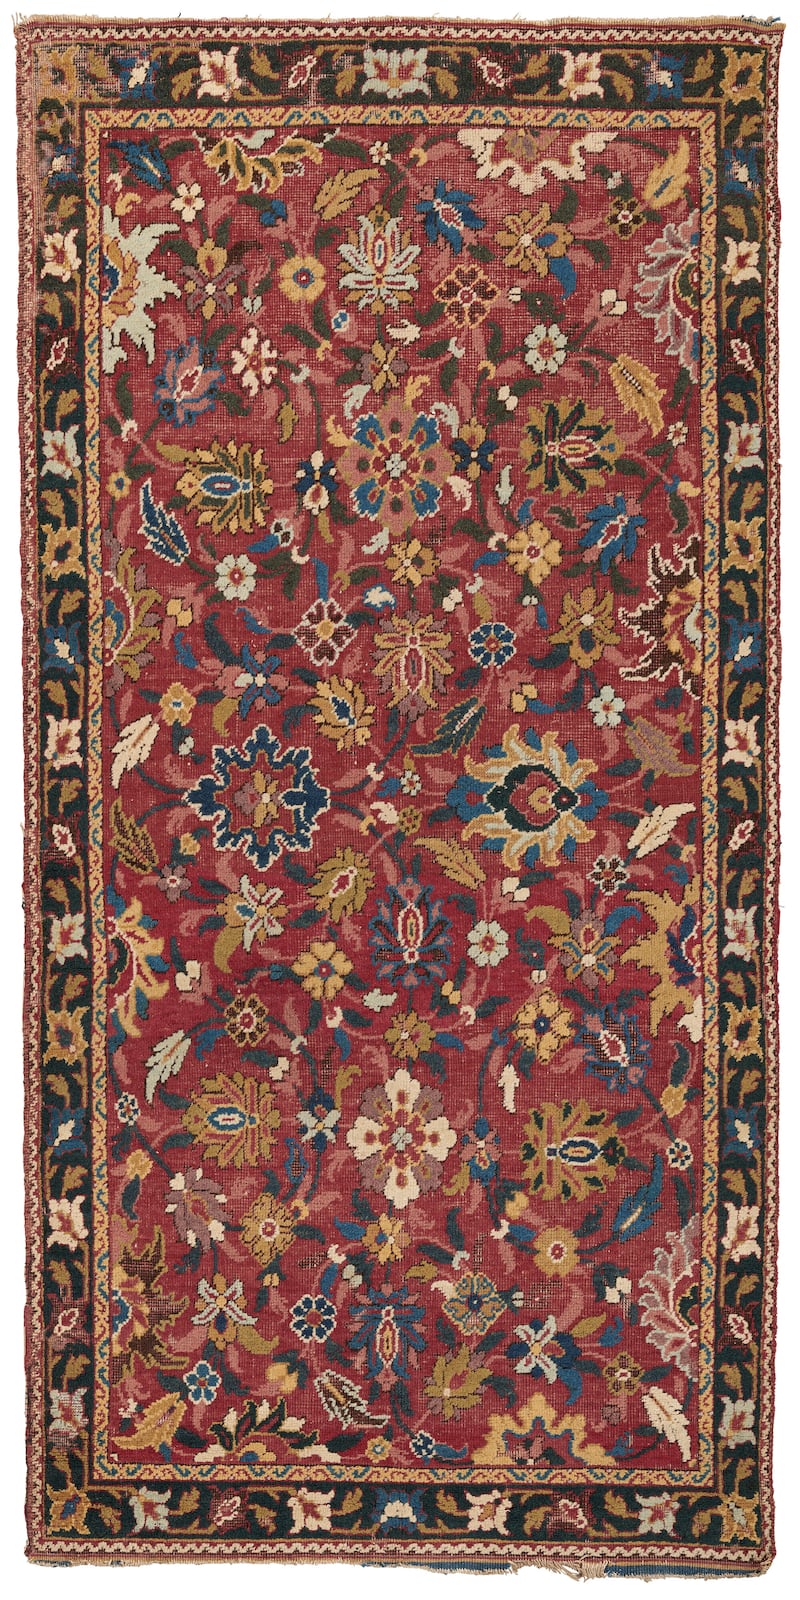 Lot 205 - a Deccani rug from 18th century South India